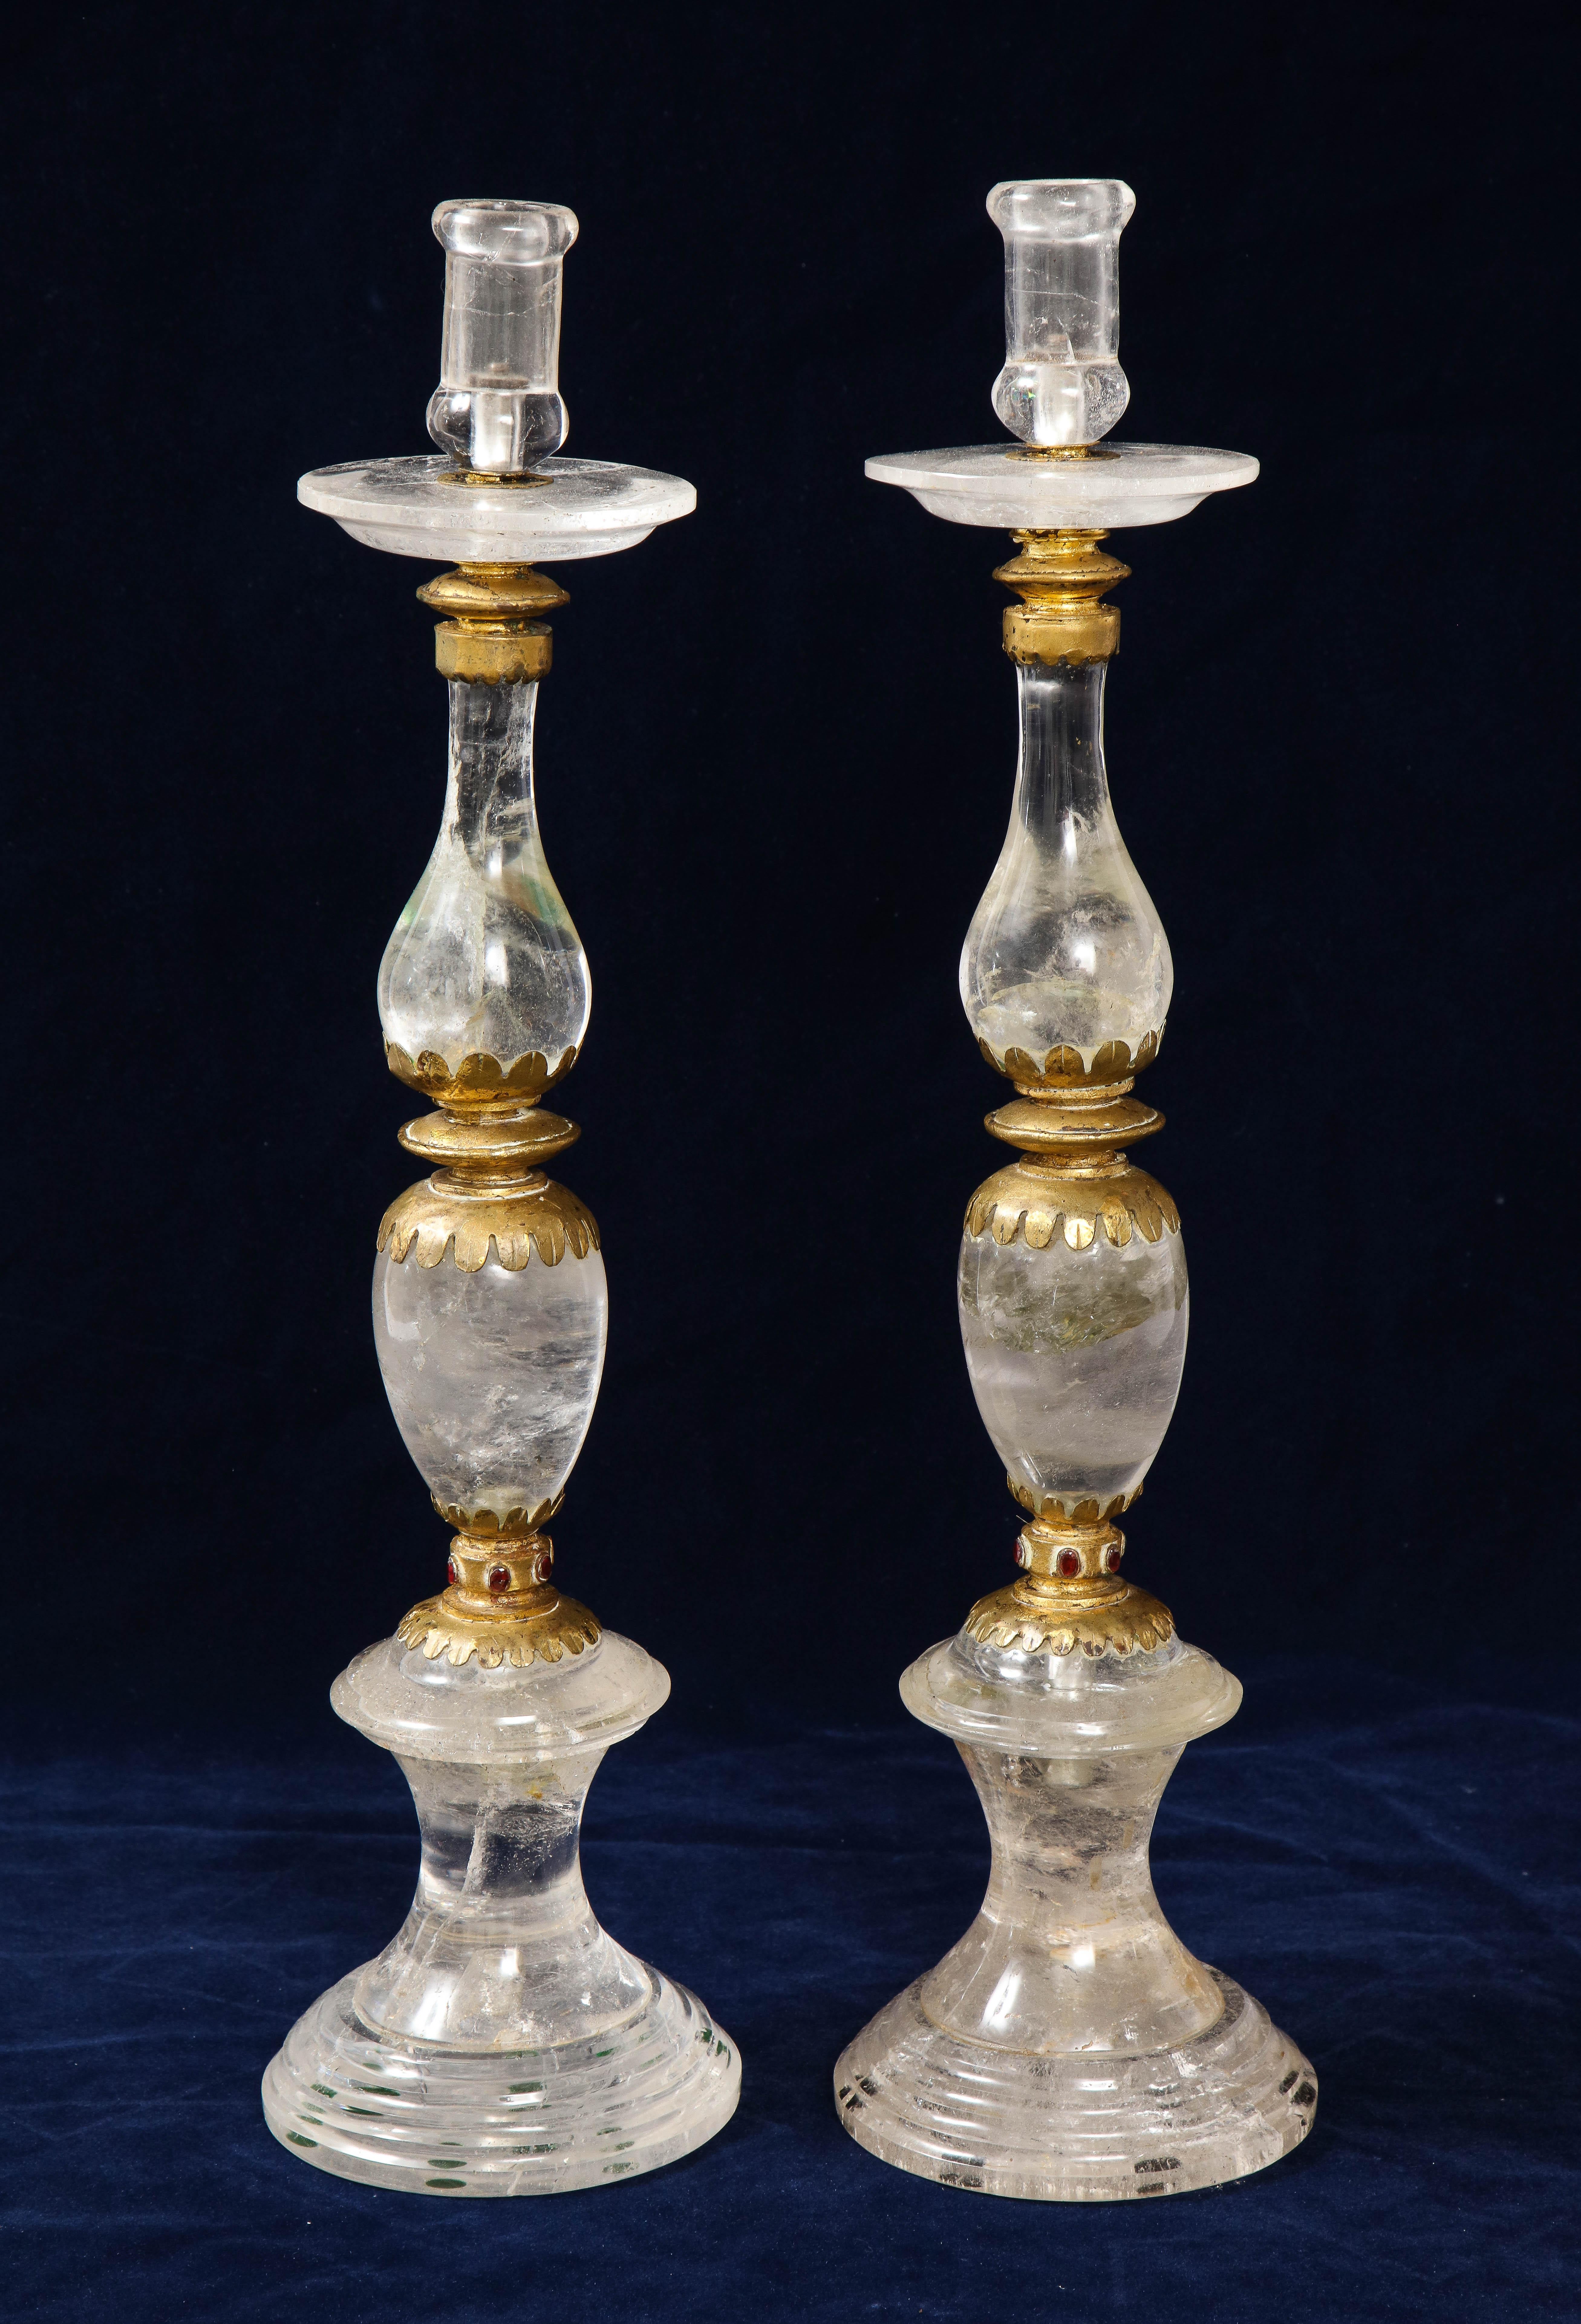 A fine and very large pair of jeweled French Art Deco rock crystal candlesticks, with mercury gilded bronze mounts. The multi shaped elements are adorned by 3 carat hand faceted ruby red garnets on each side and blend into a harmonious whole. These